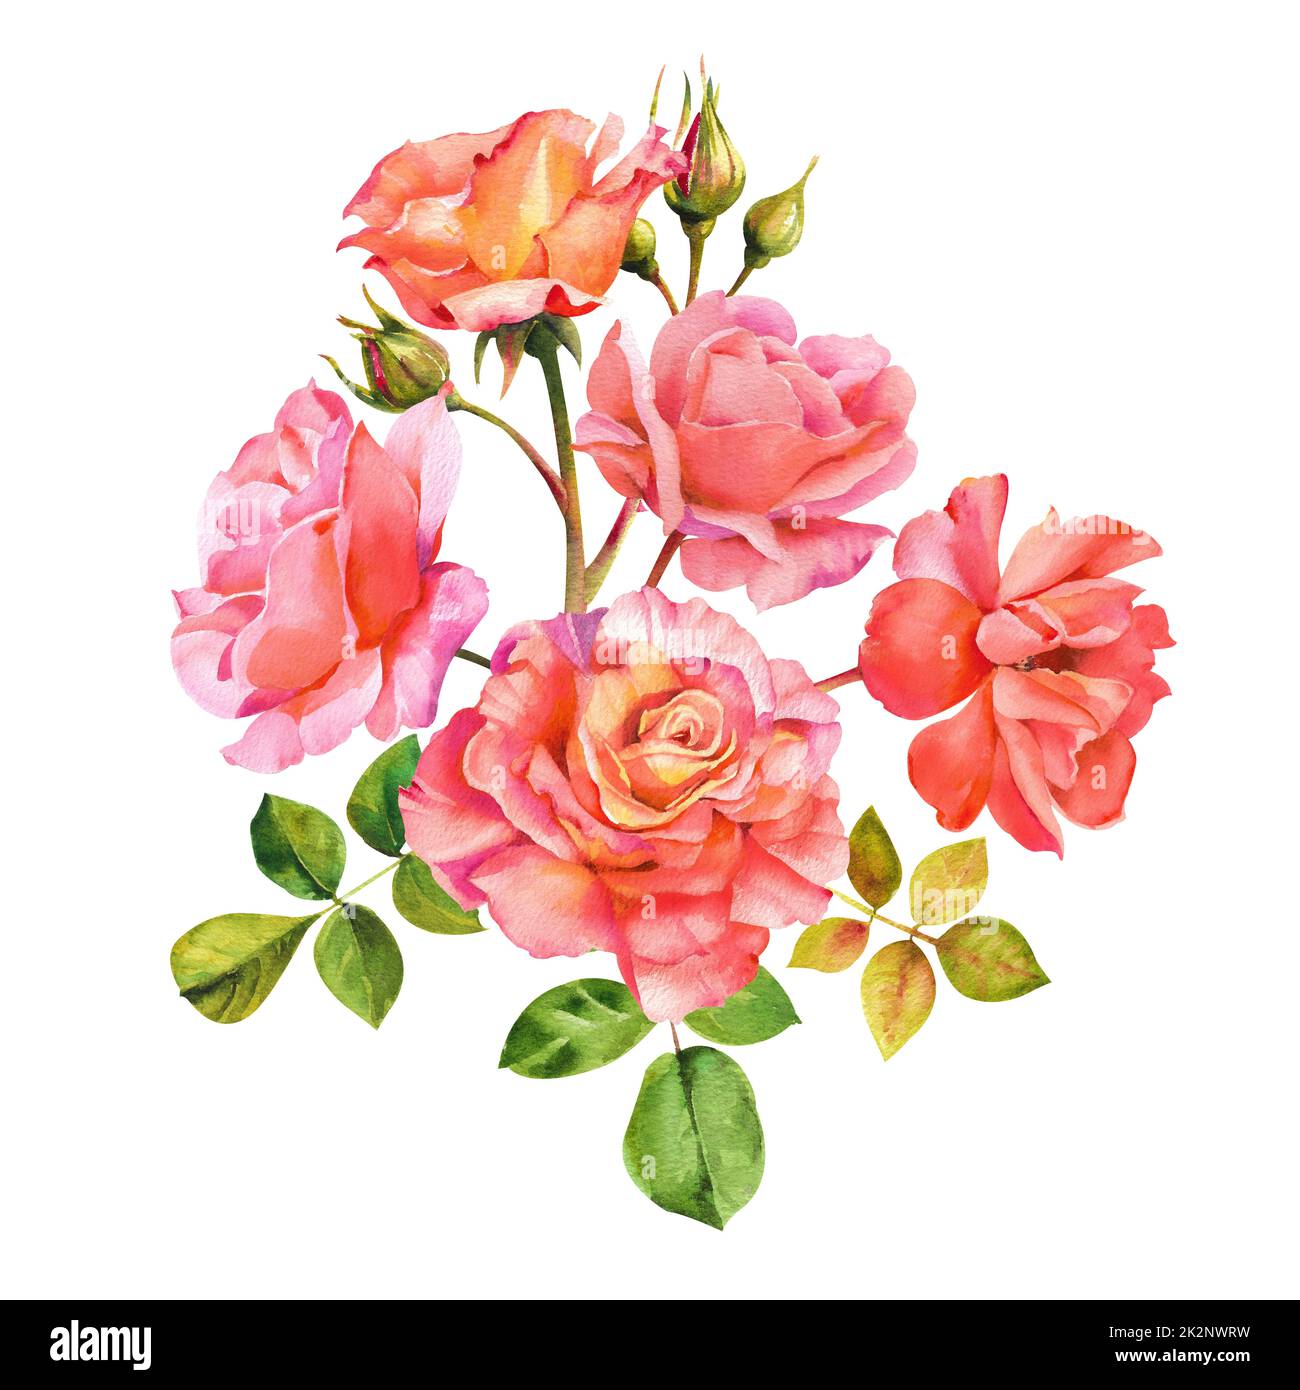 Watercolor roses. Compilation of pink and orange roses with petals and ...